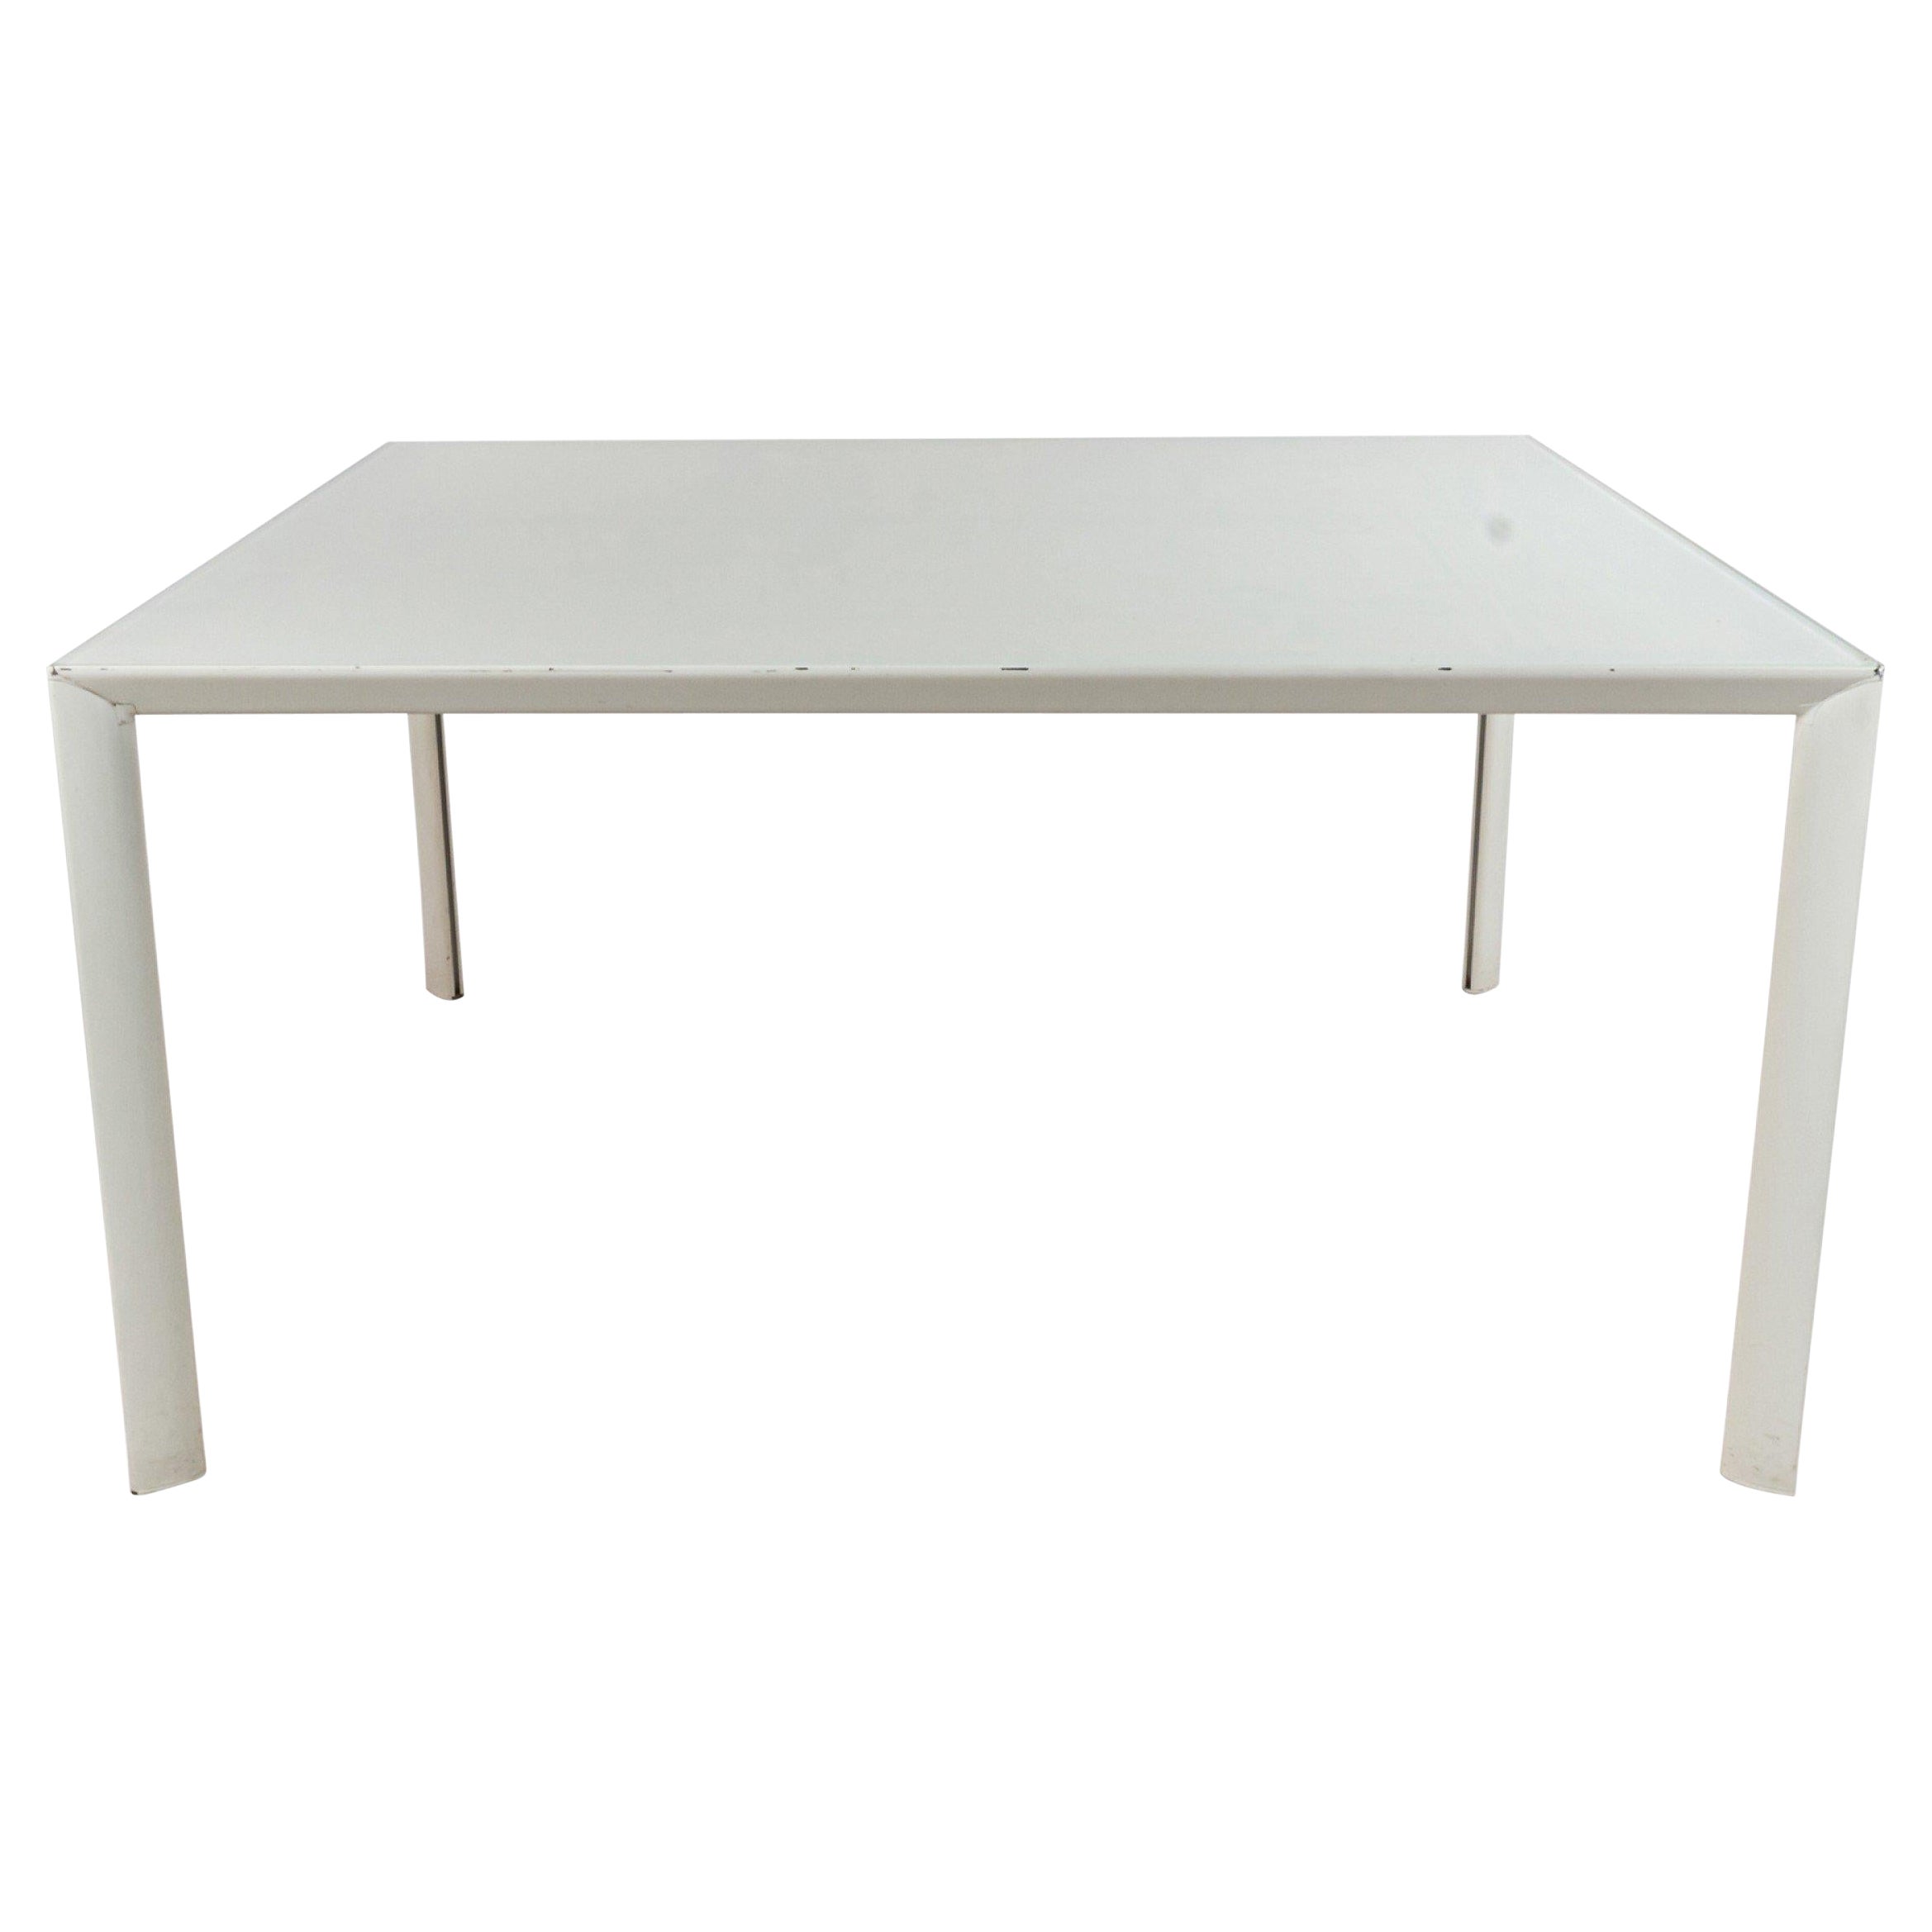 Contemporary White Metal Square Work Tables